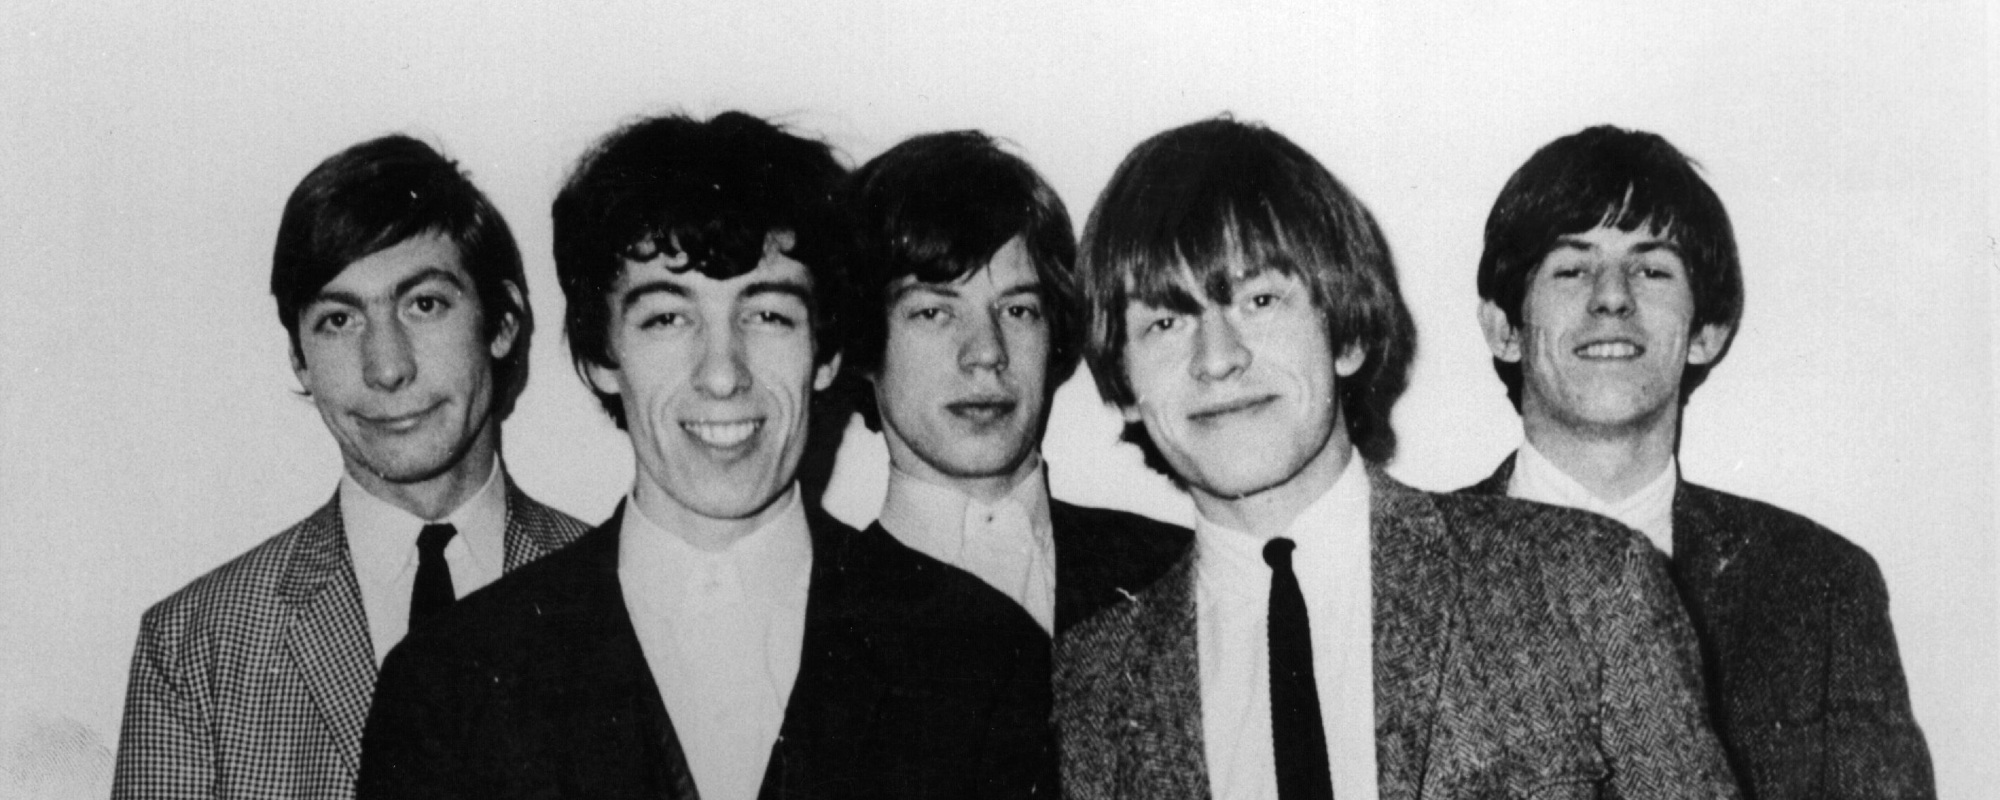 On This Day in Music History: The Rolling Stones’ Album Release Party Ends in Food Fight